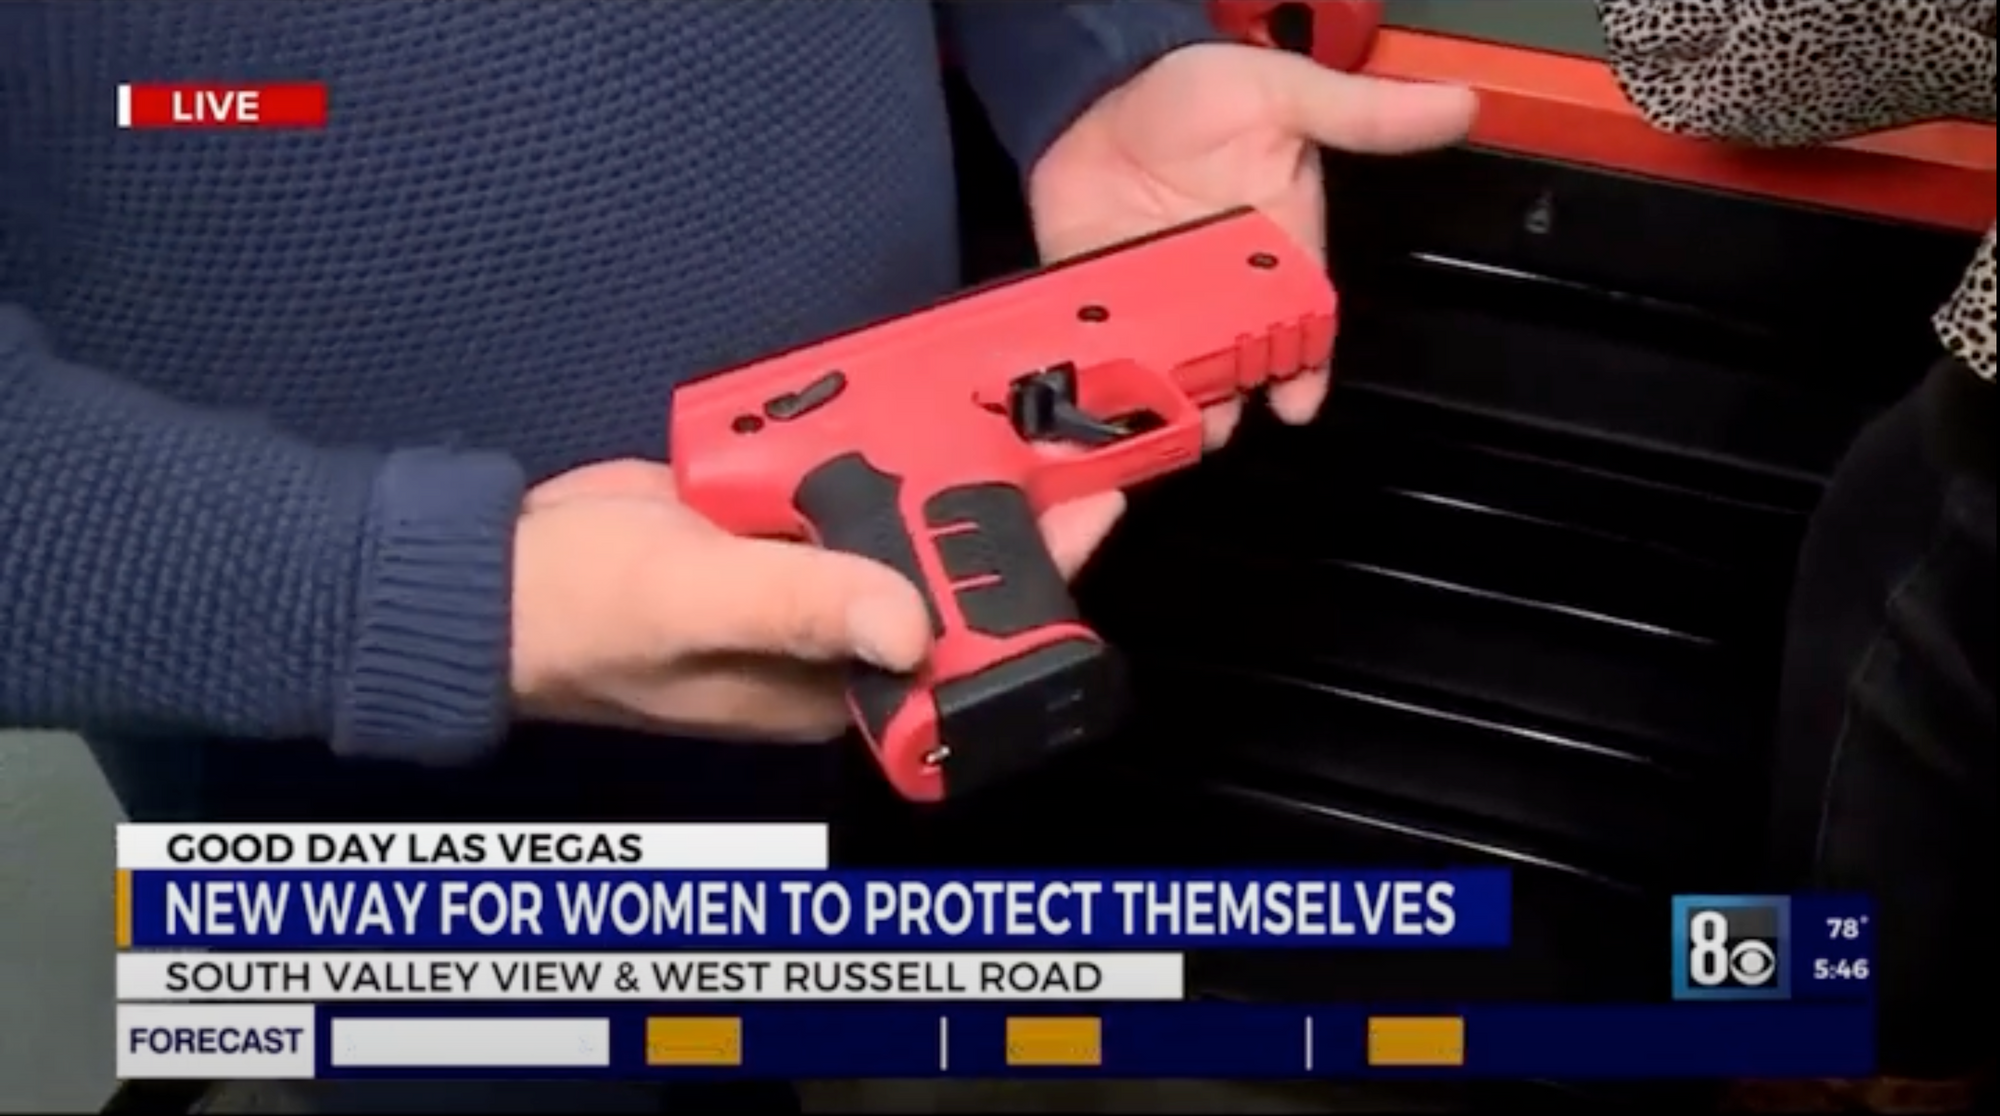 CBS Las Vegas Features the Importance of Having a Byrna for Self-Defense